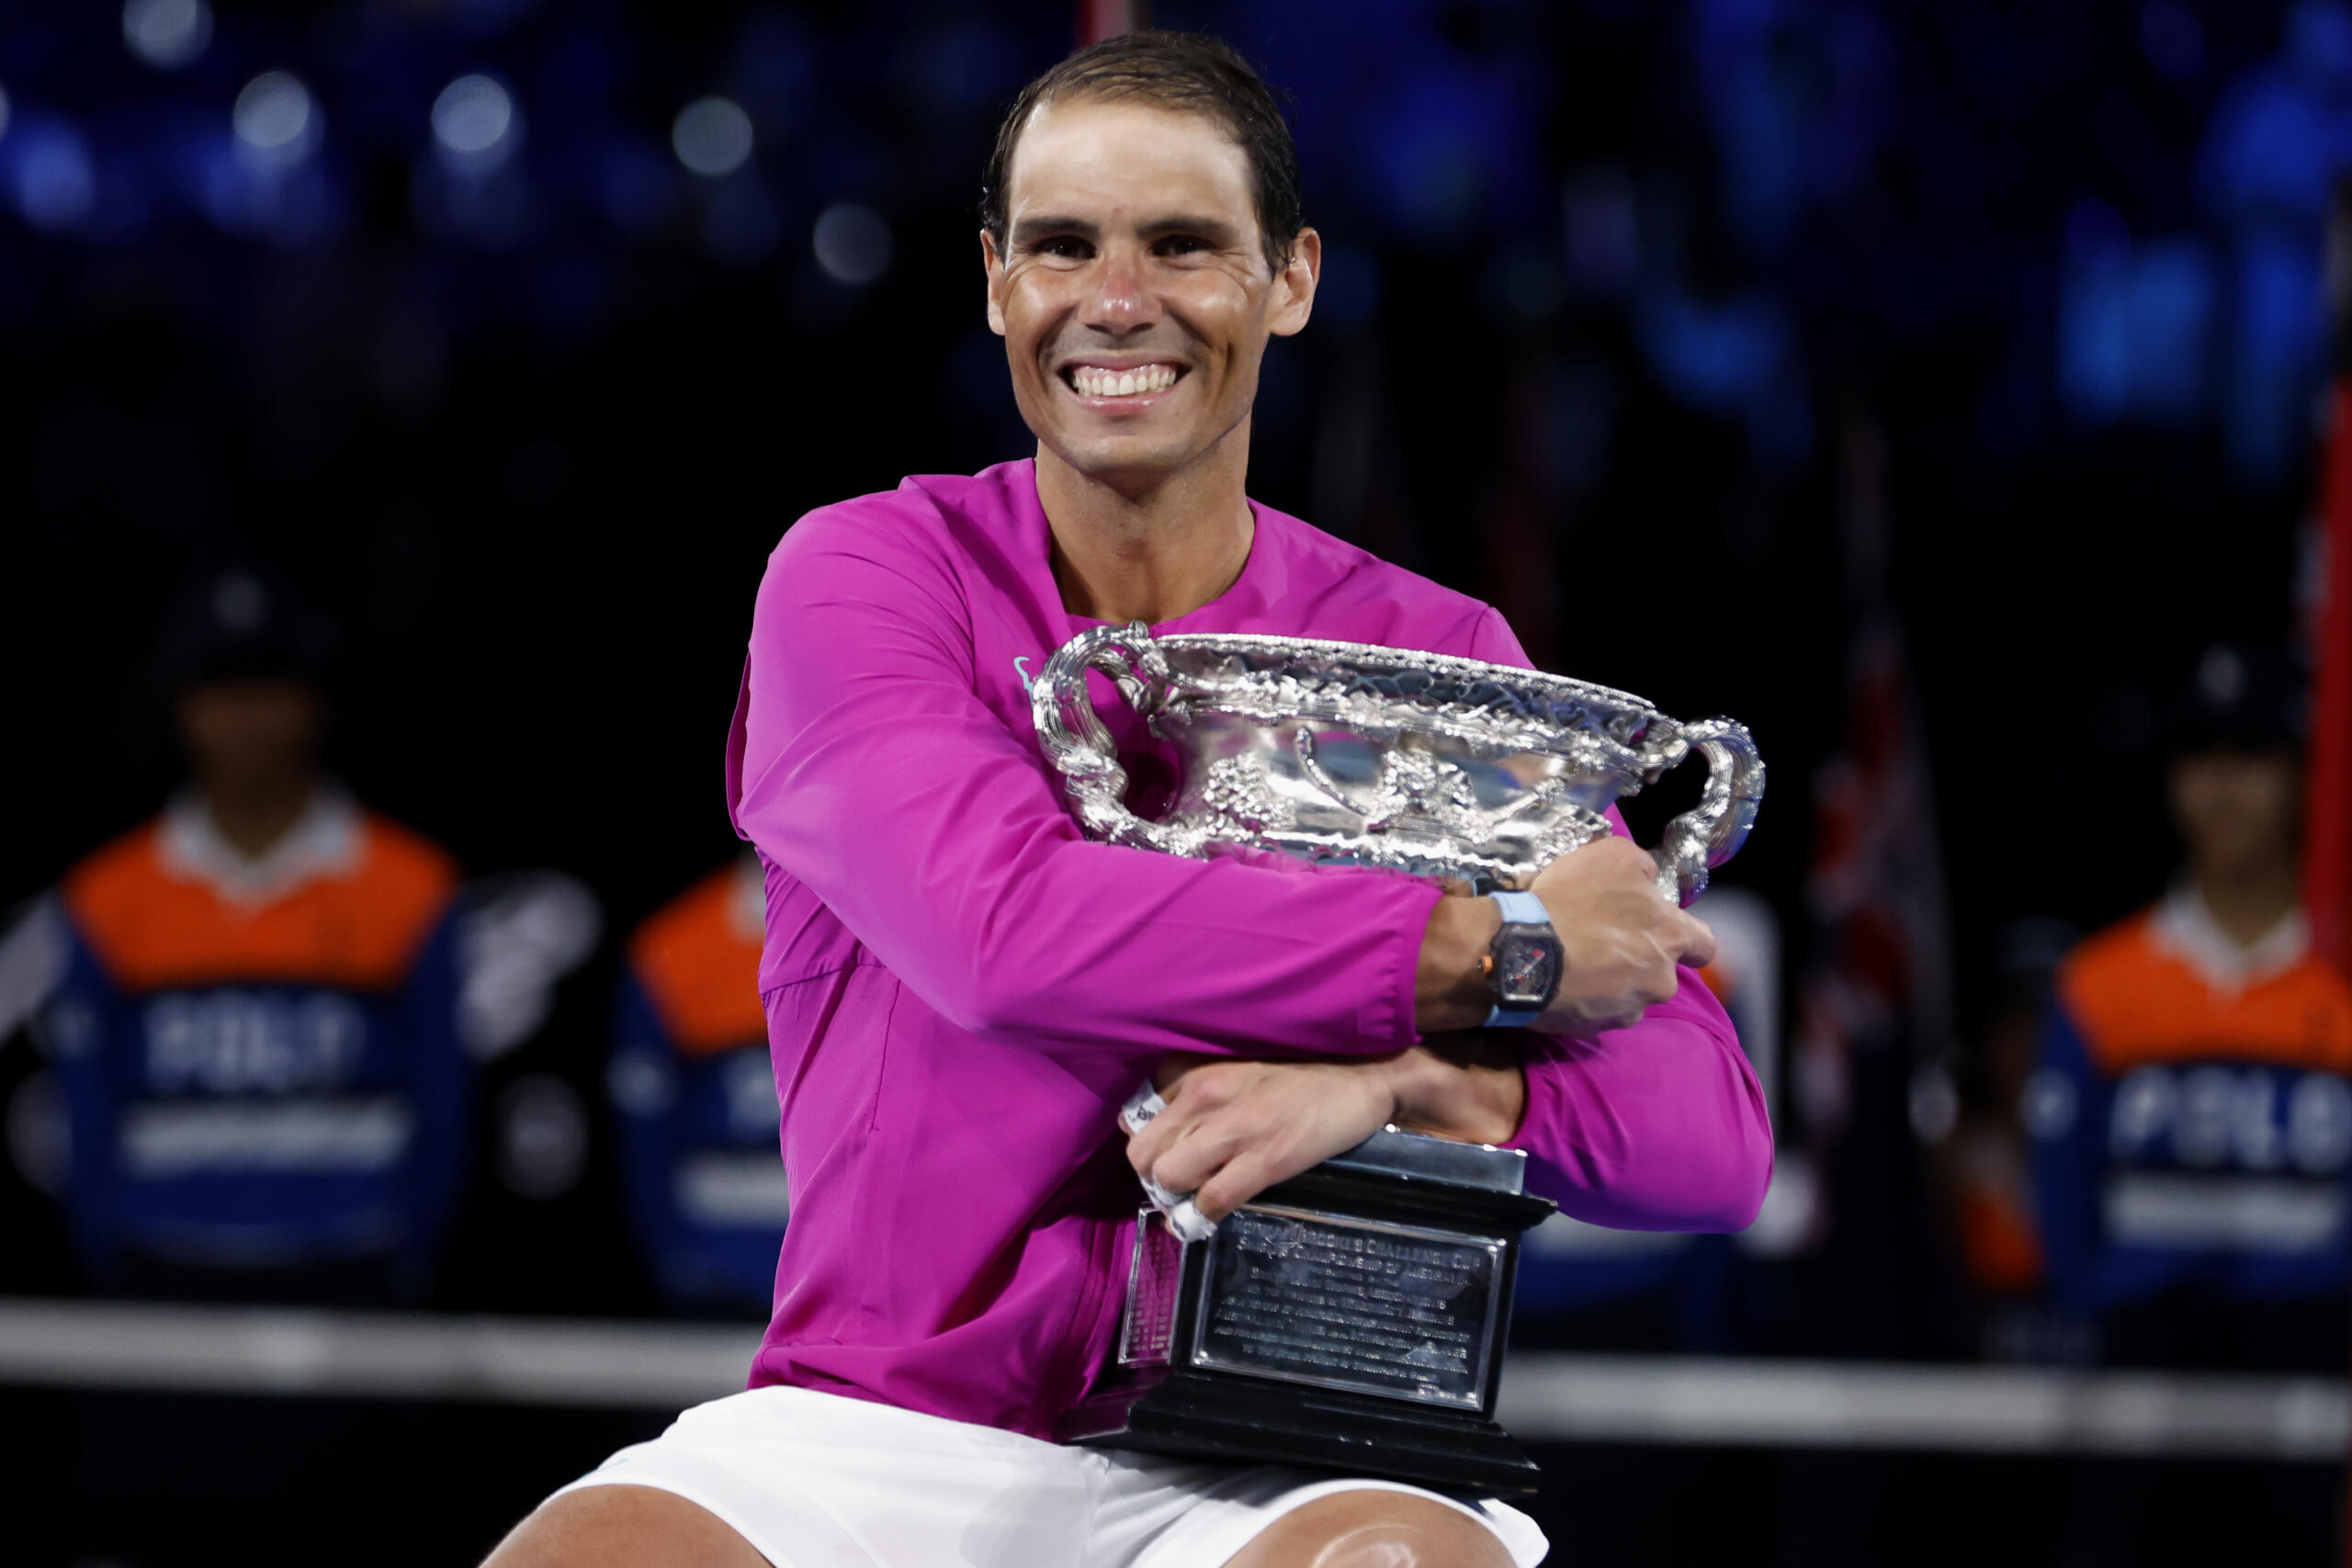 Rafael Nadal of Spain holds the Norman Brookes Challenge Cup after defeating Daniil Medvedev of Russia in the men's singles final at the Australian Open tennis championships in Melbourne, Australia, early Monday, Jan. 31, 2022.